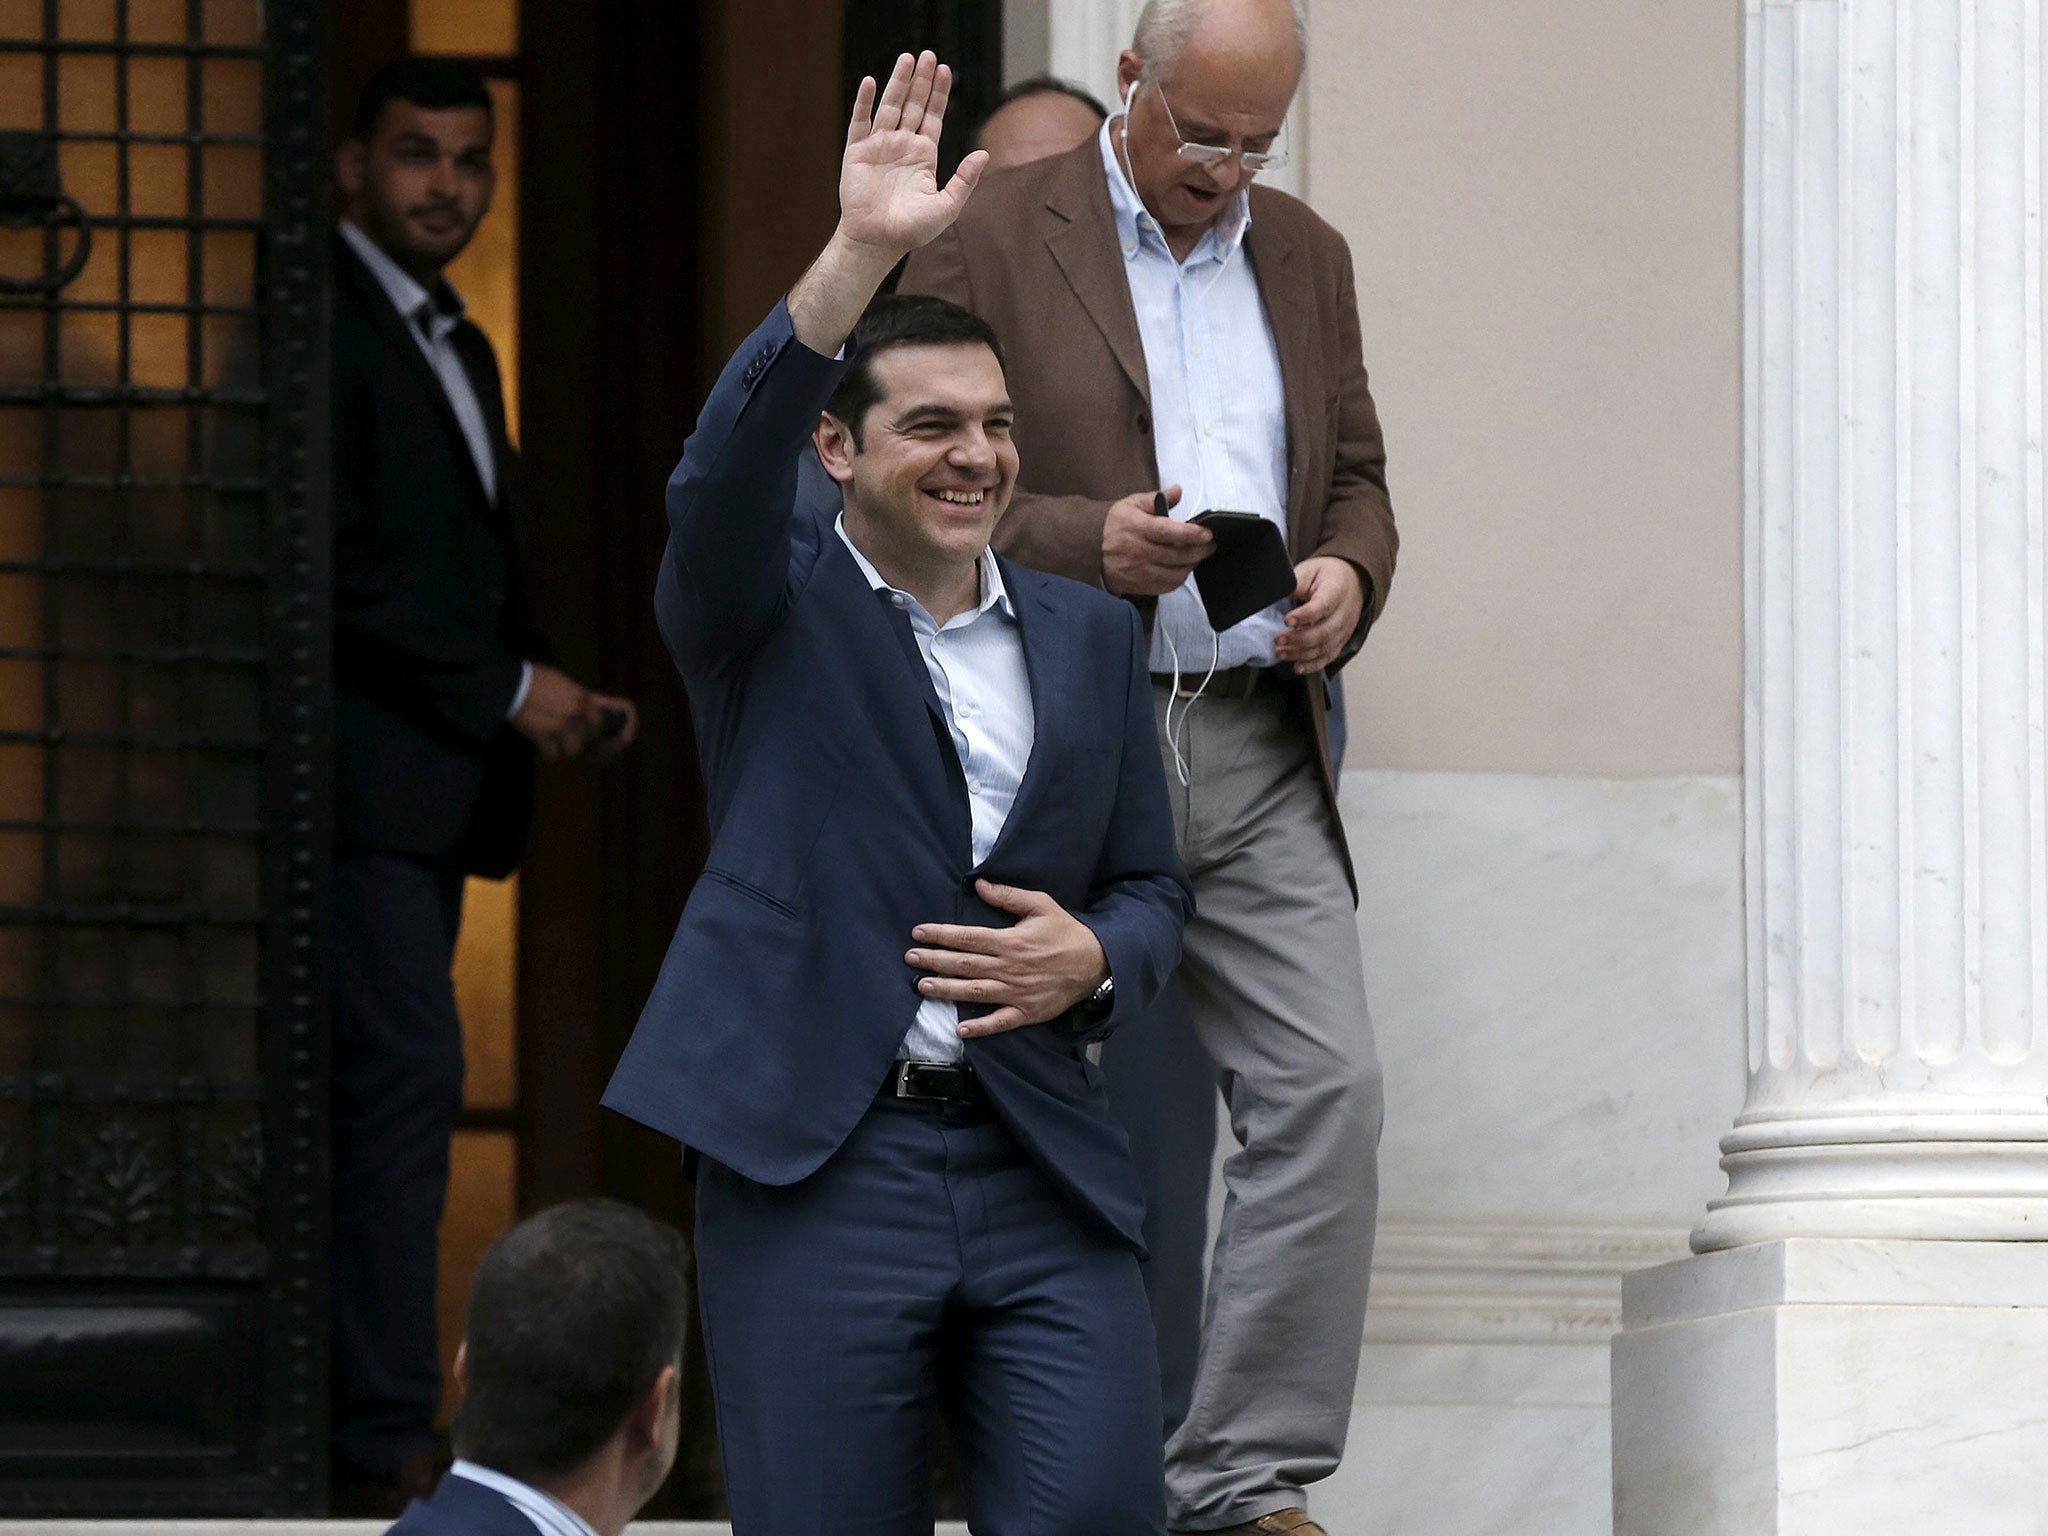 Greek Prime Minister Alexis Tsipras has presented European Union leaders with a new set of proposals ahead of Monday's emergency Eurozone summit in a bid to avert a Greek default and possible exit from the euro